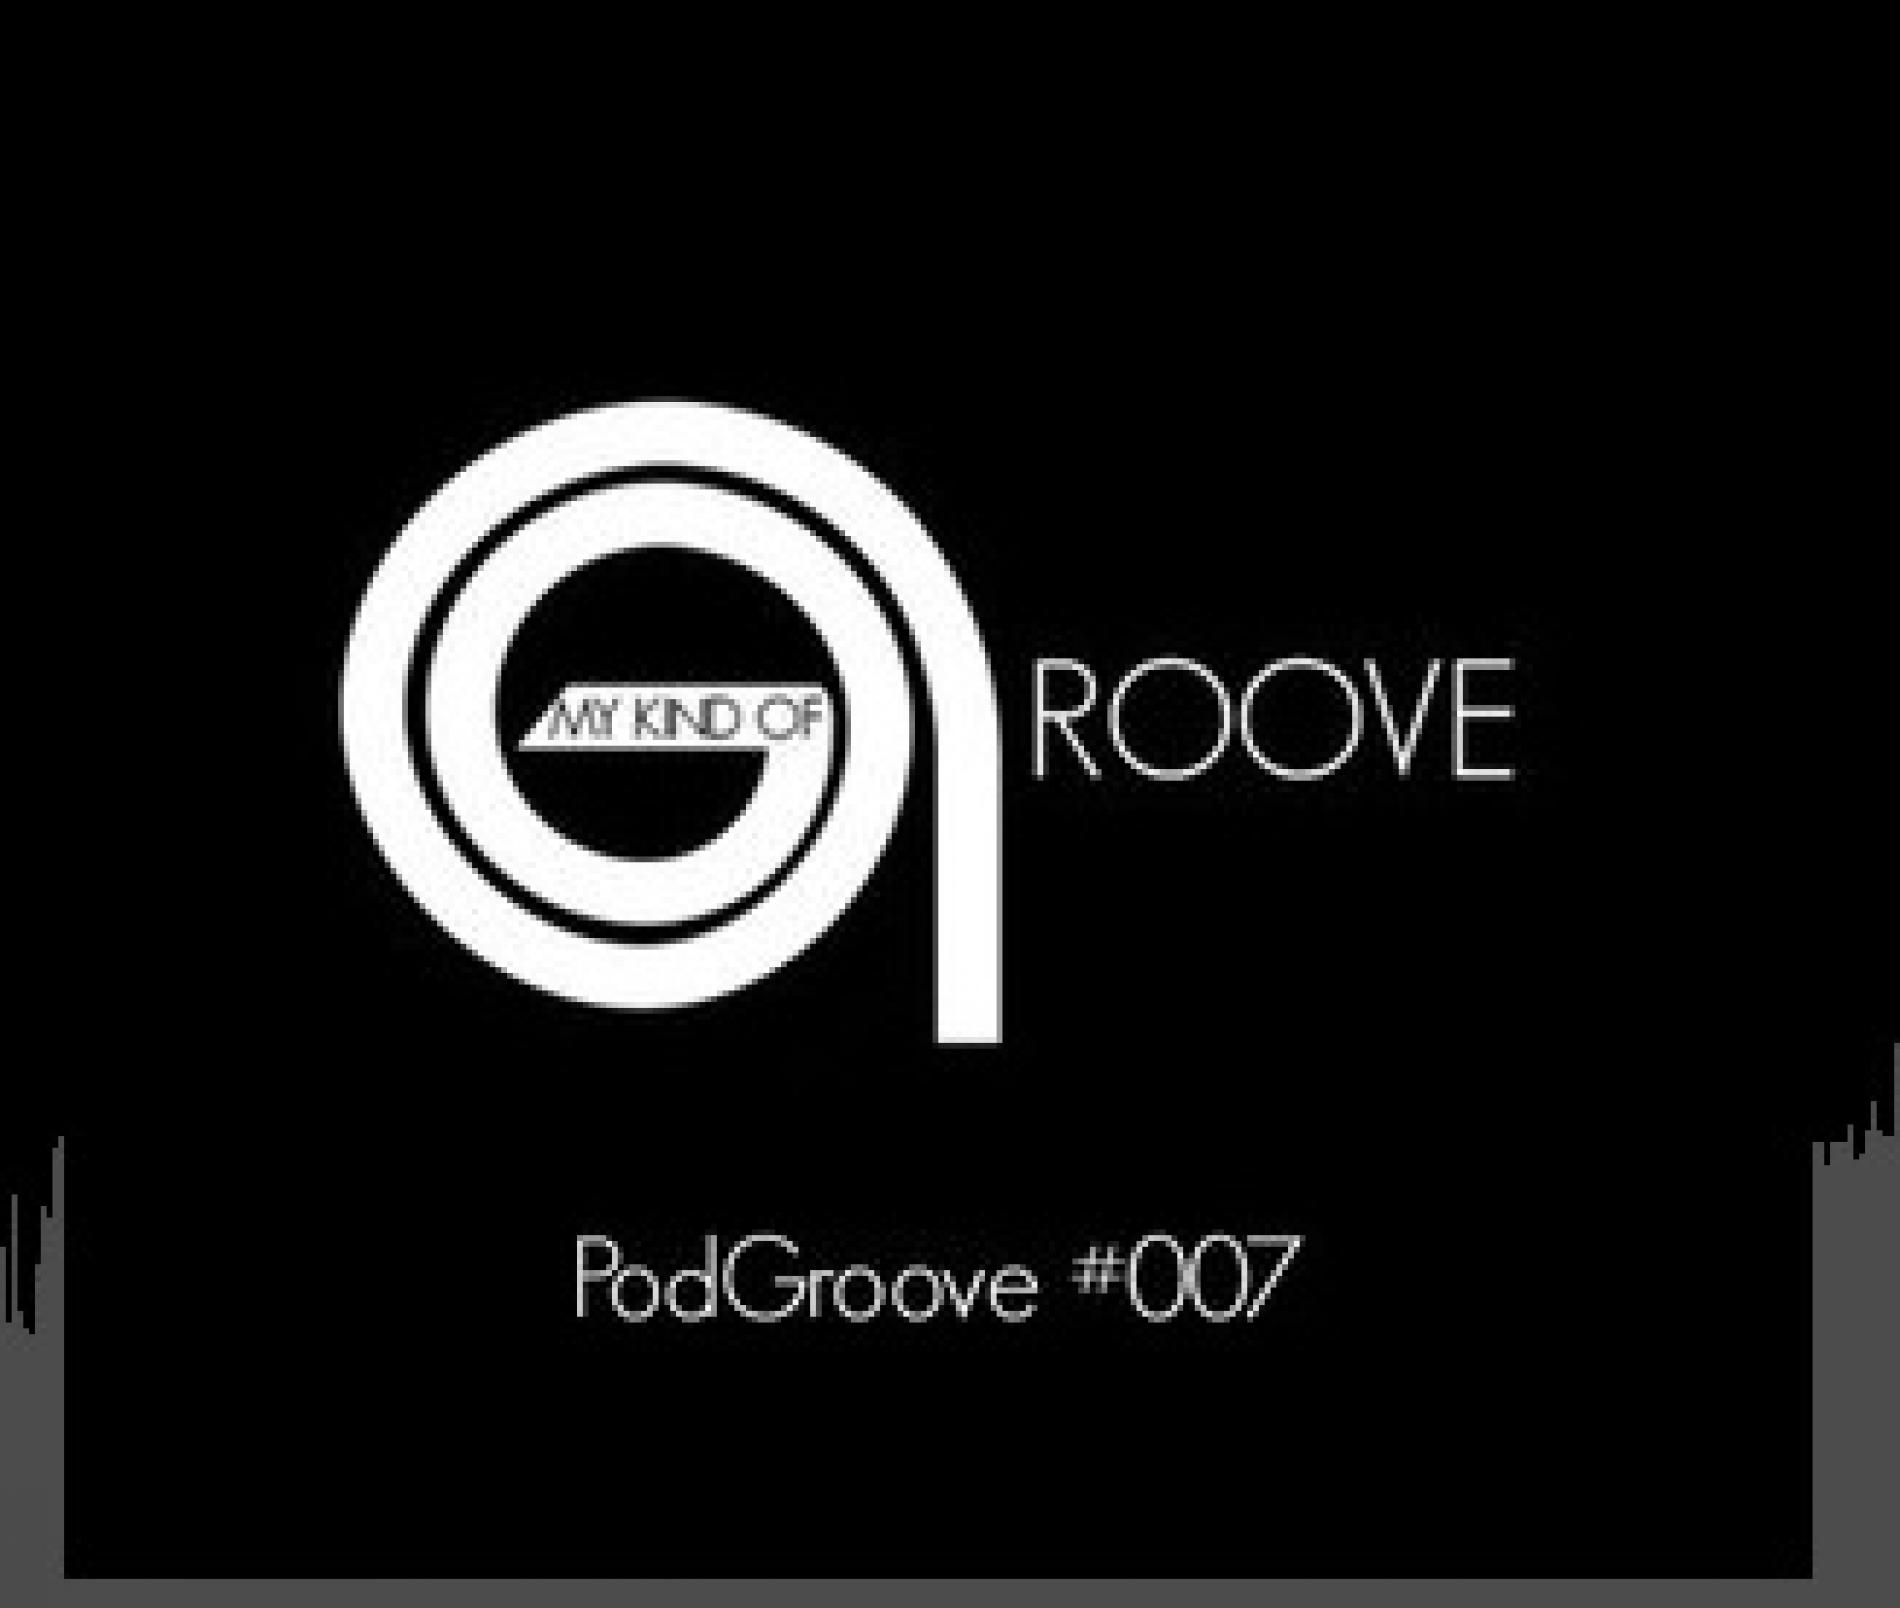 A-Jay: My Kind Of Groove – PodGroove #007